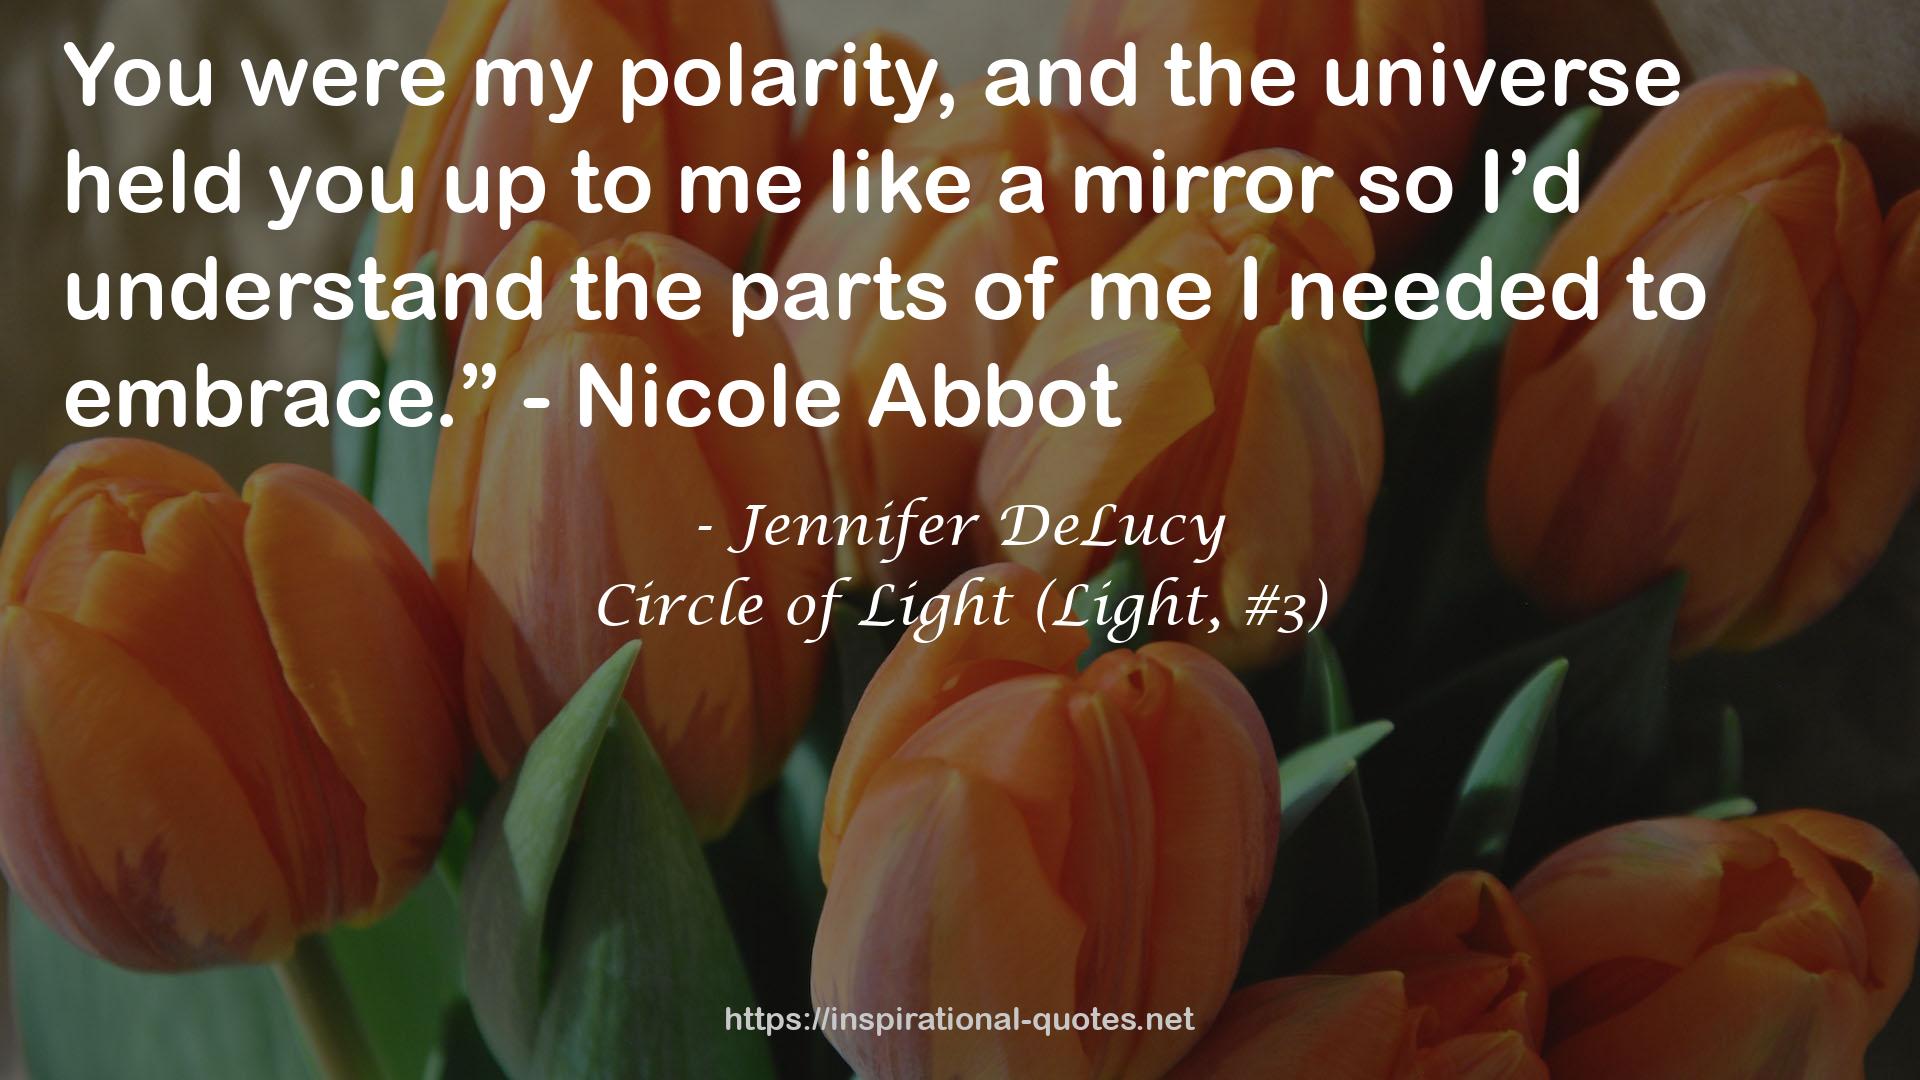 Circle of Light (Light, #3) QUOTES